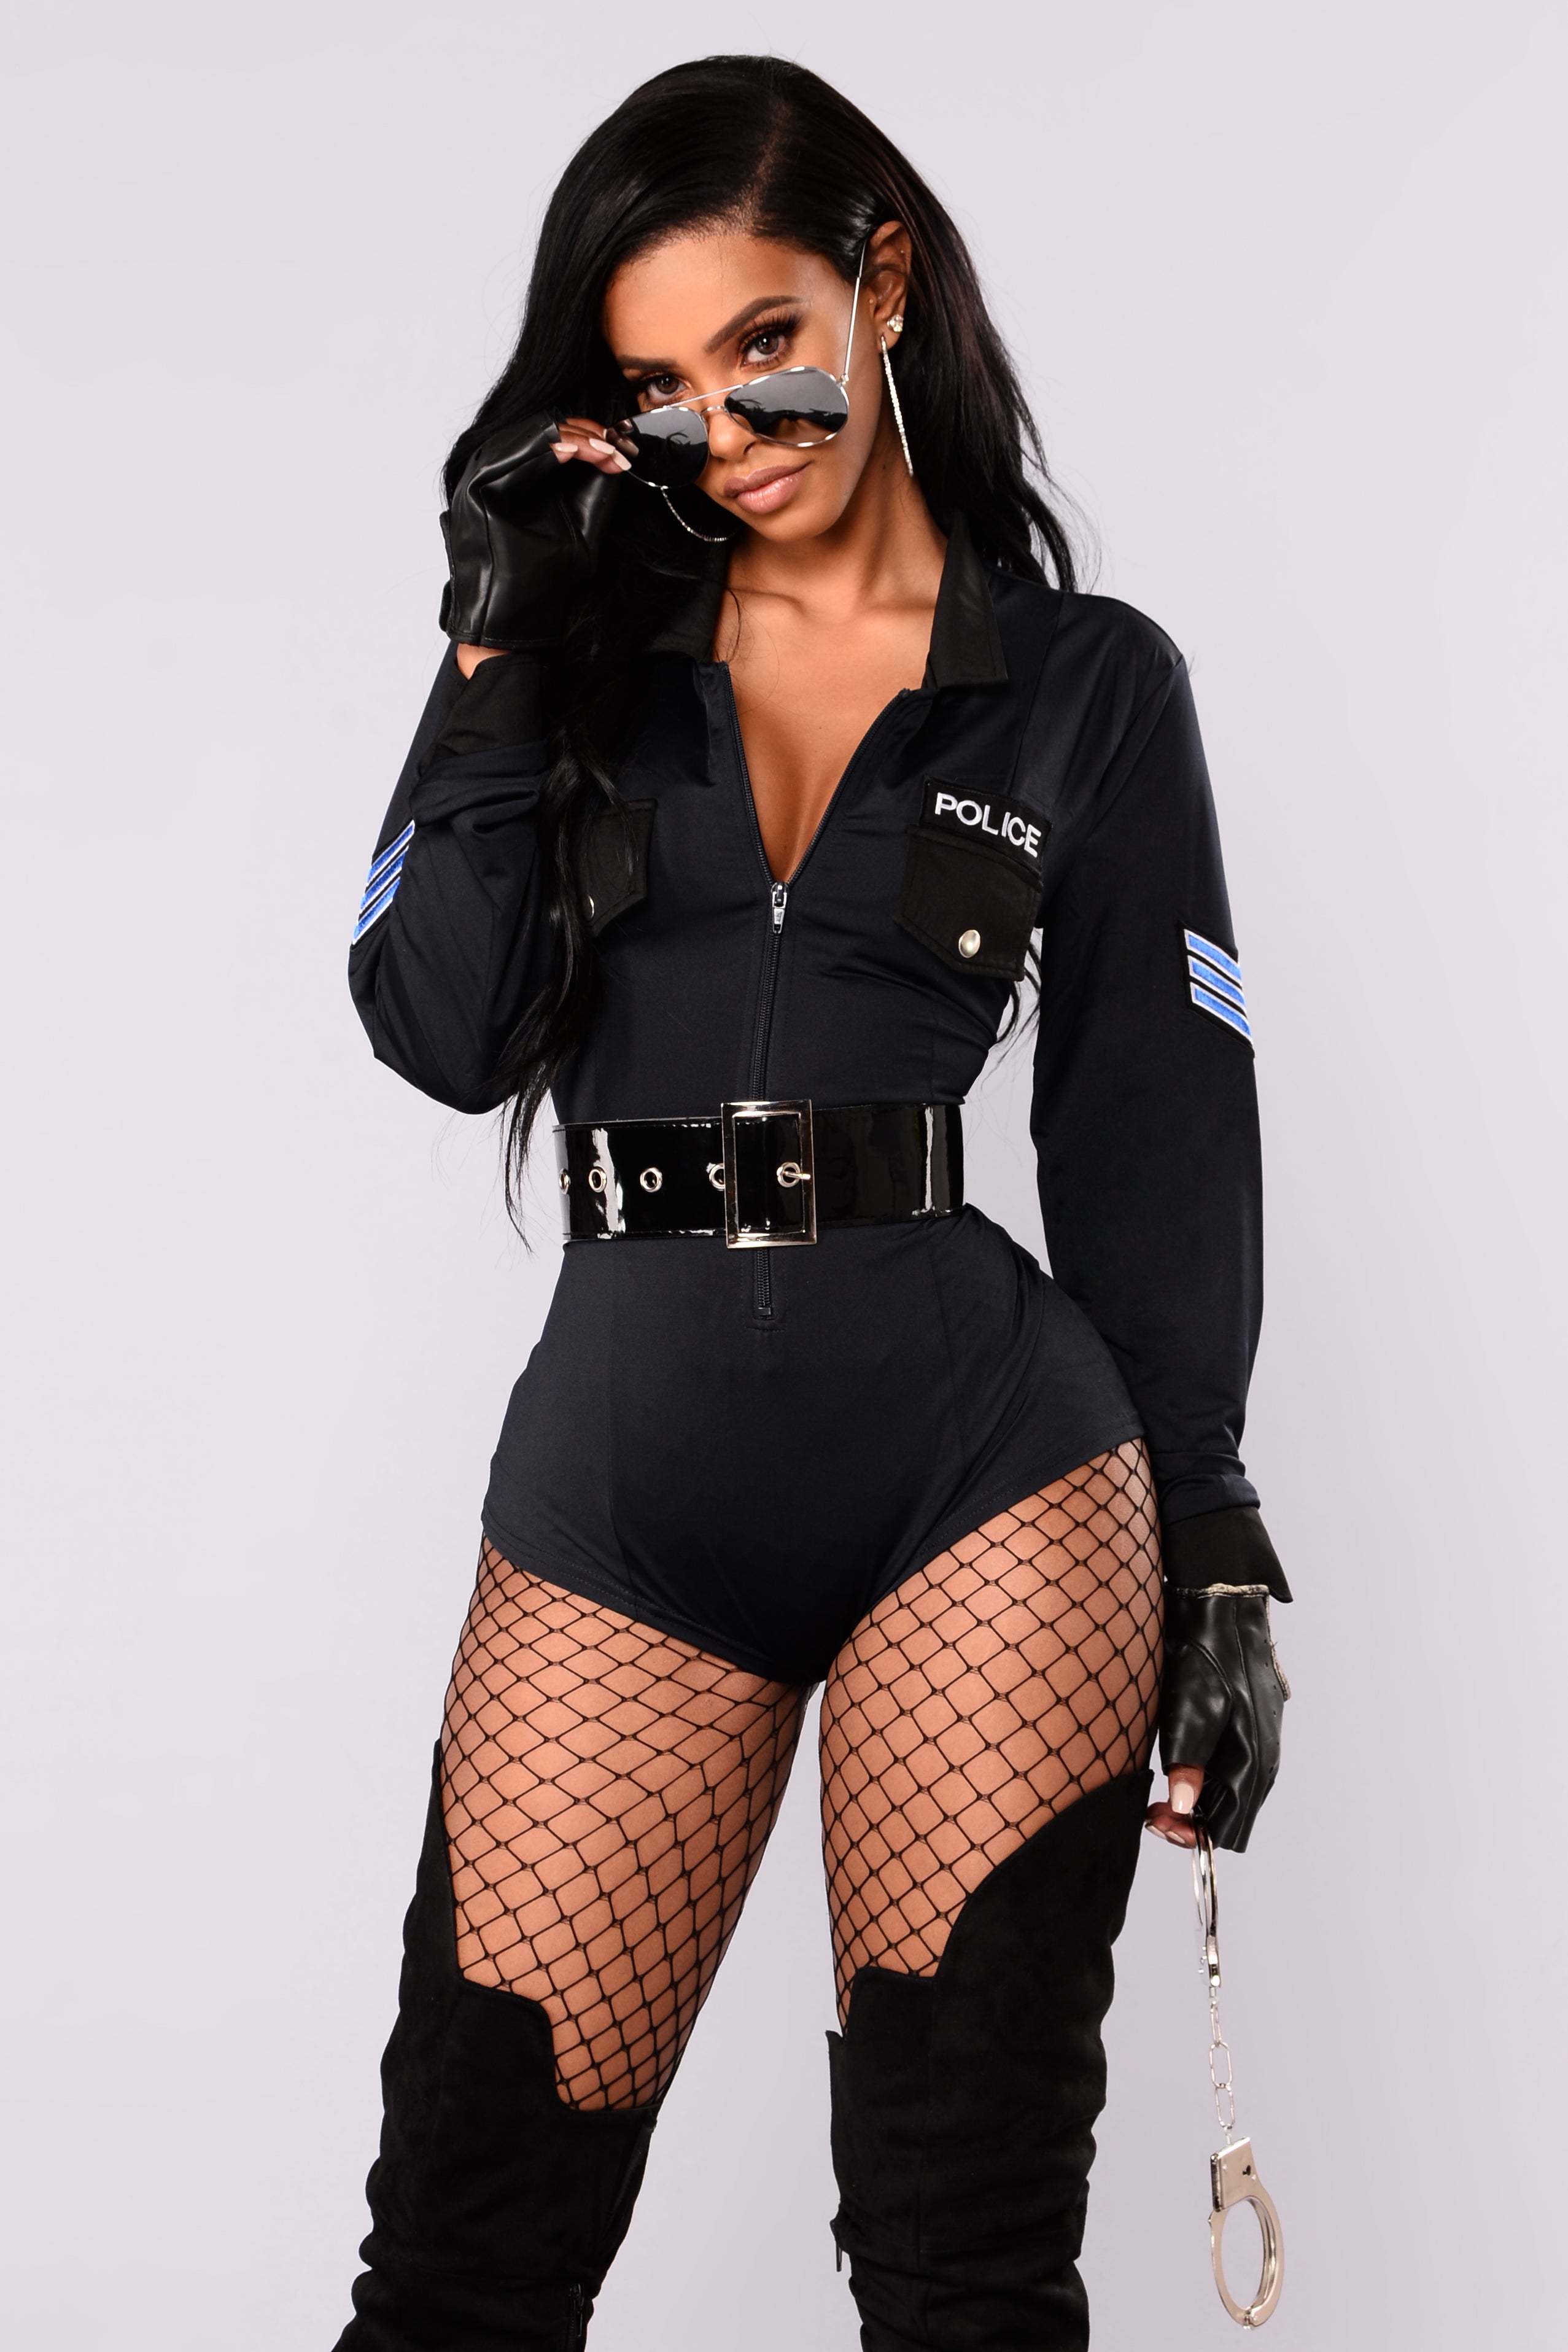 Find more Cop Cutie Girls Halloween Costume for sale at up to 90% off